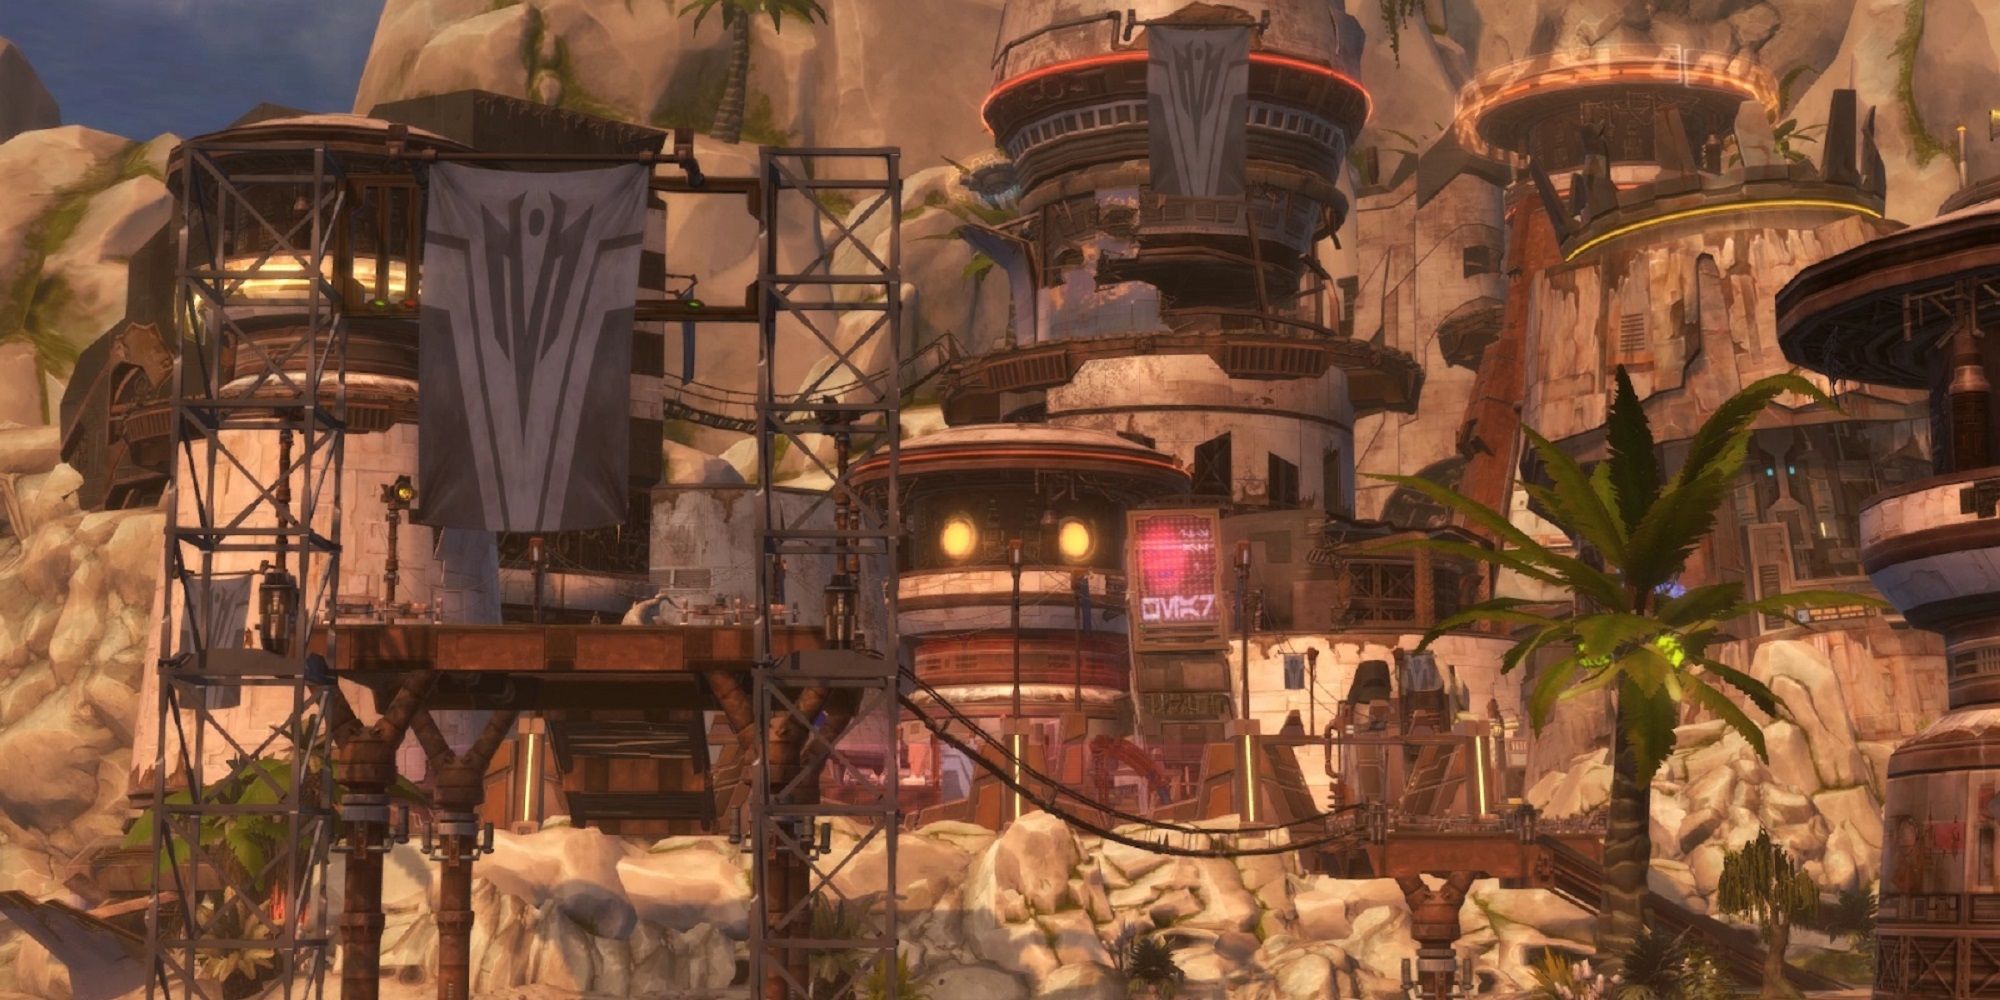 SWTOR's Rishi Hideout, made up of pirate-themed buildings, bridges, and flags